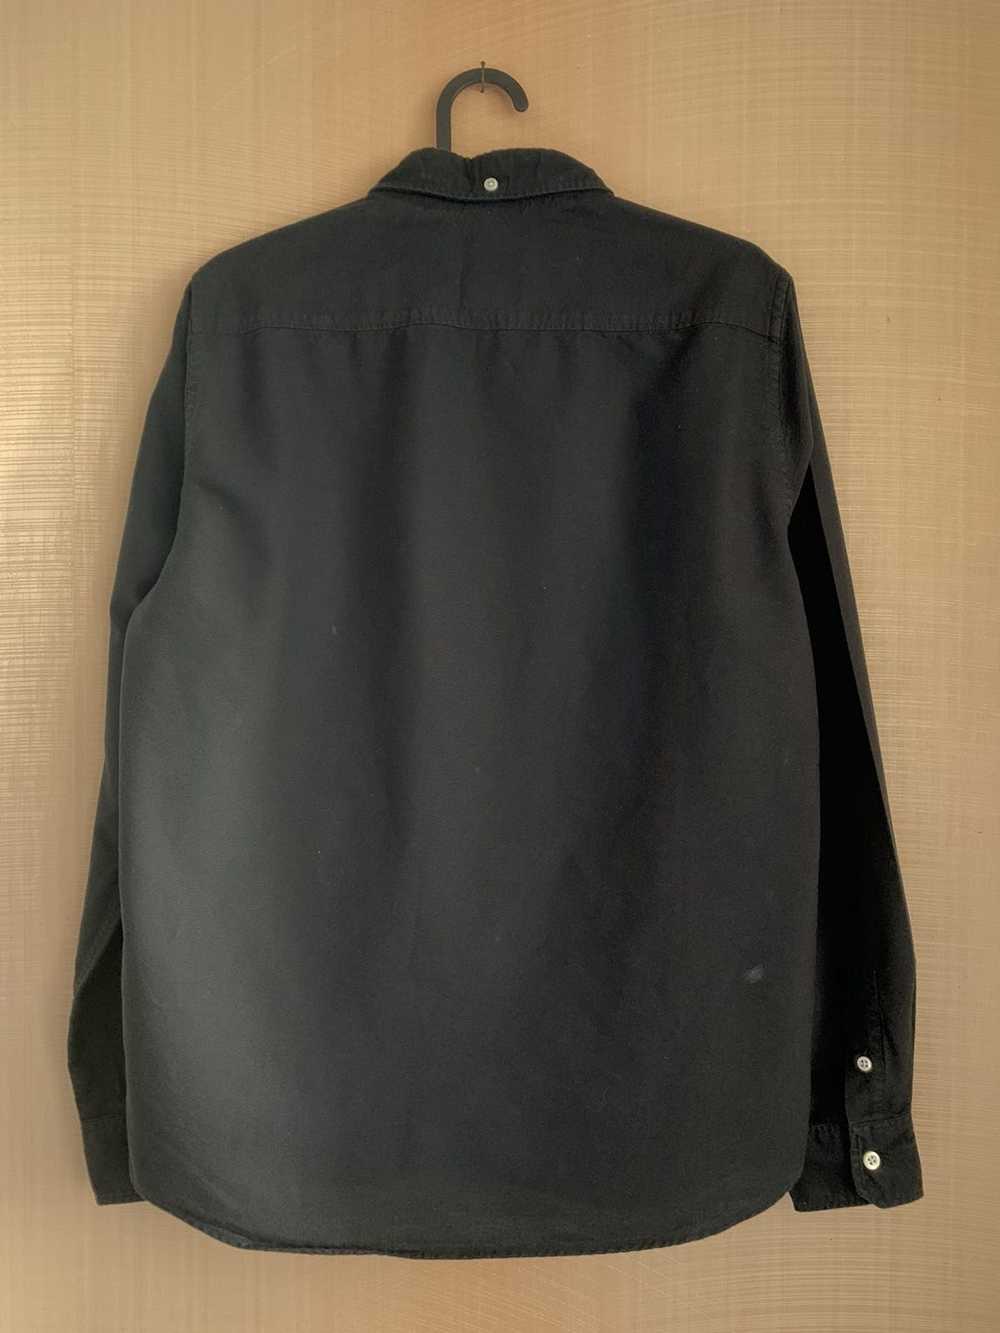 Norse Projects Norse Projects black shirt size S - image 3